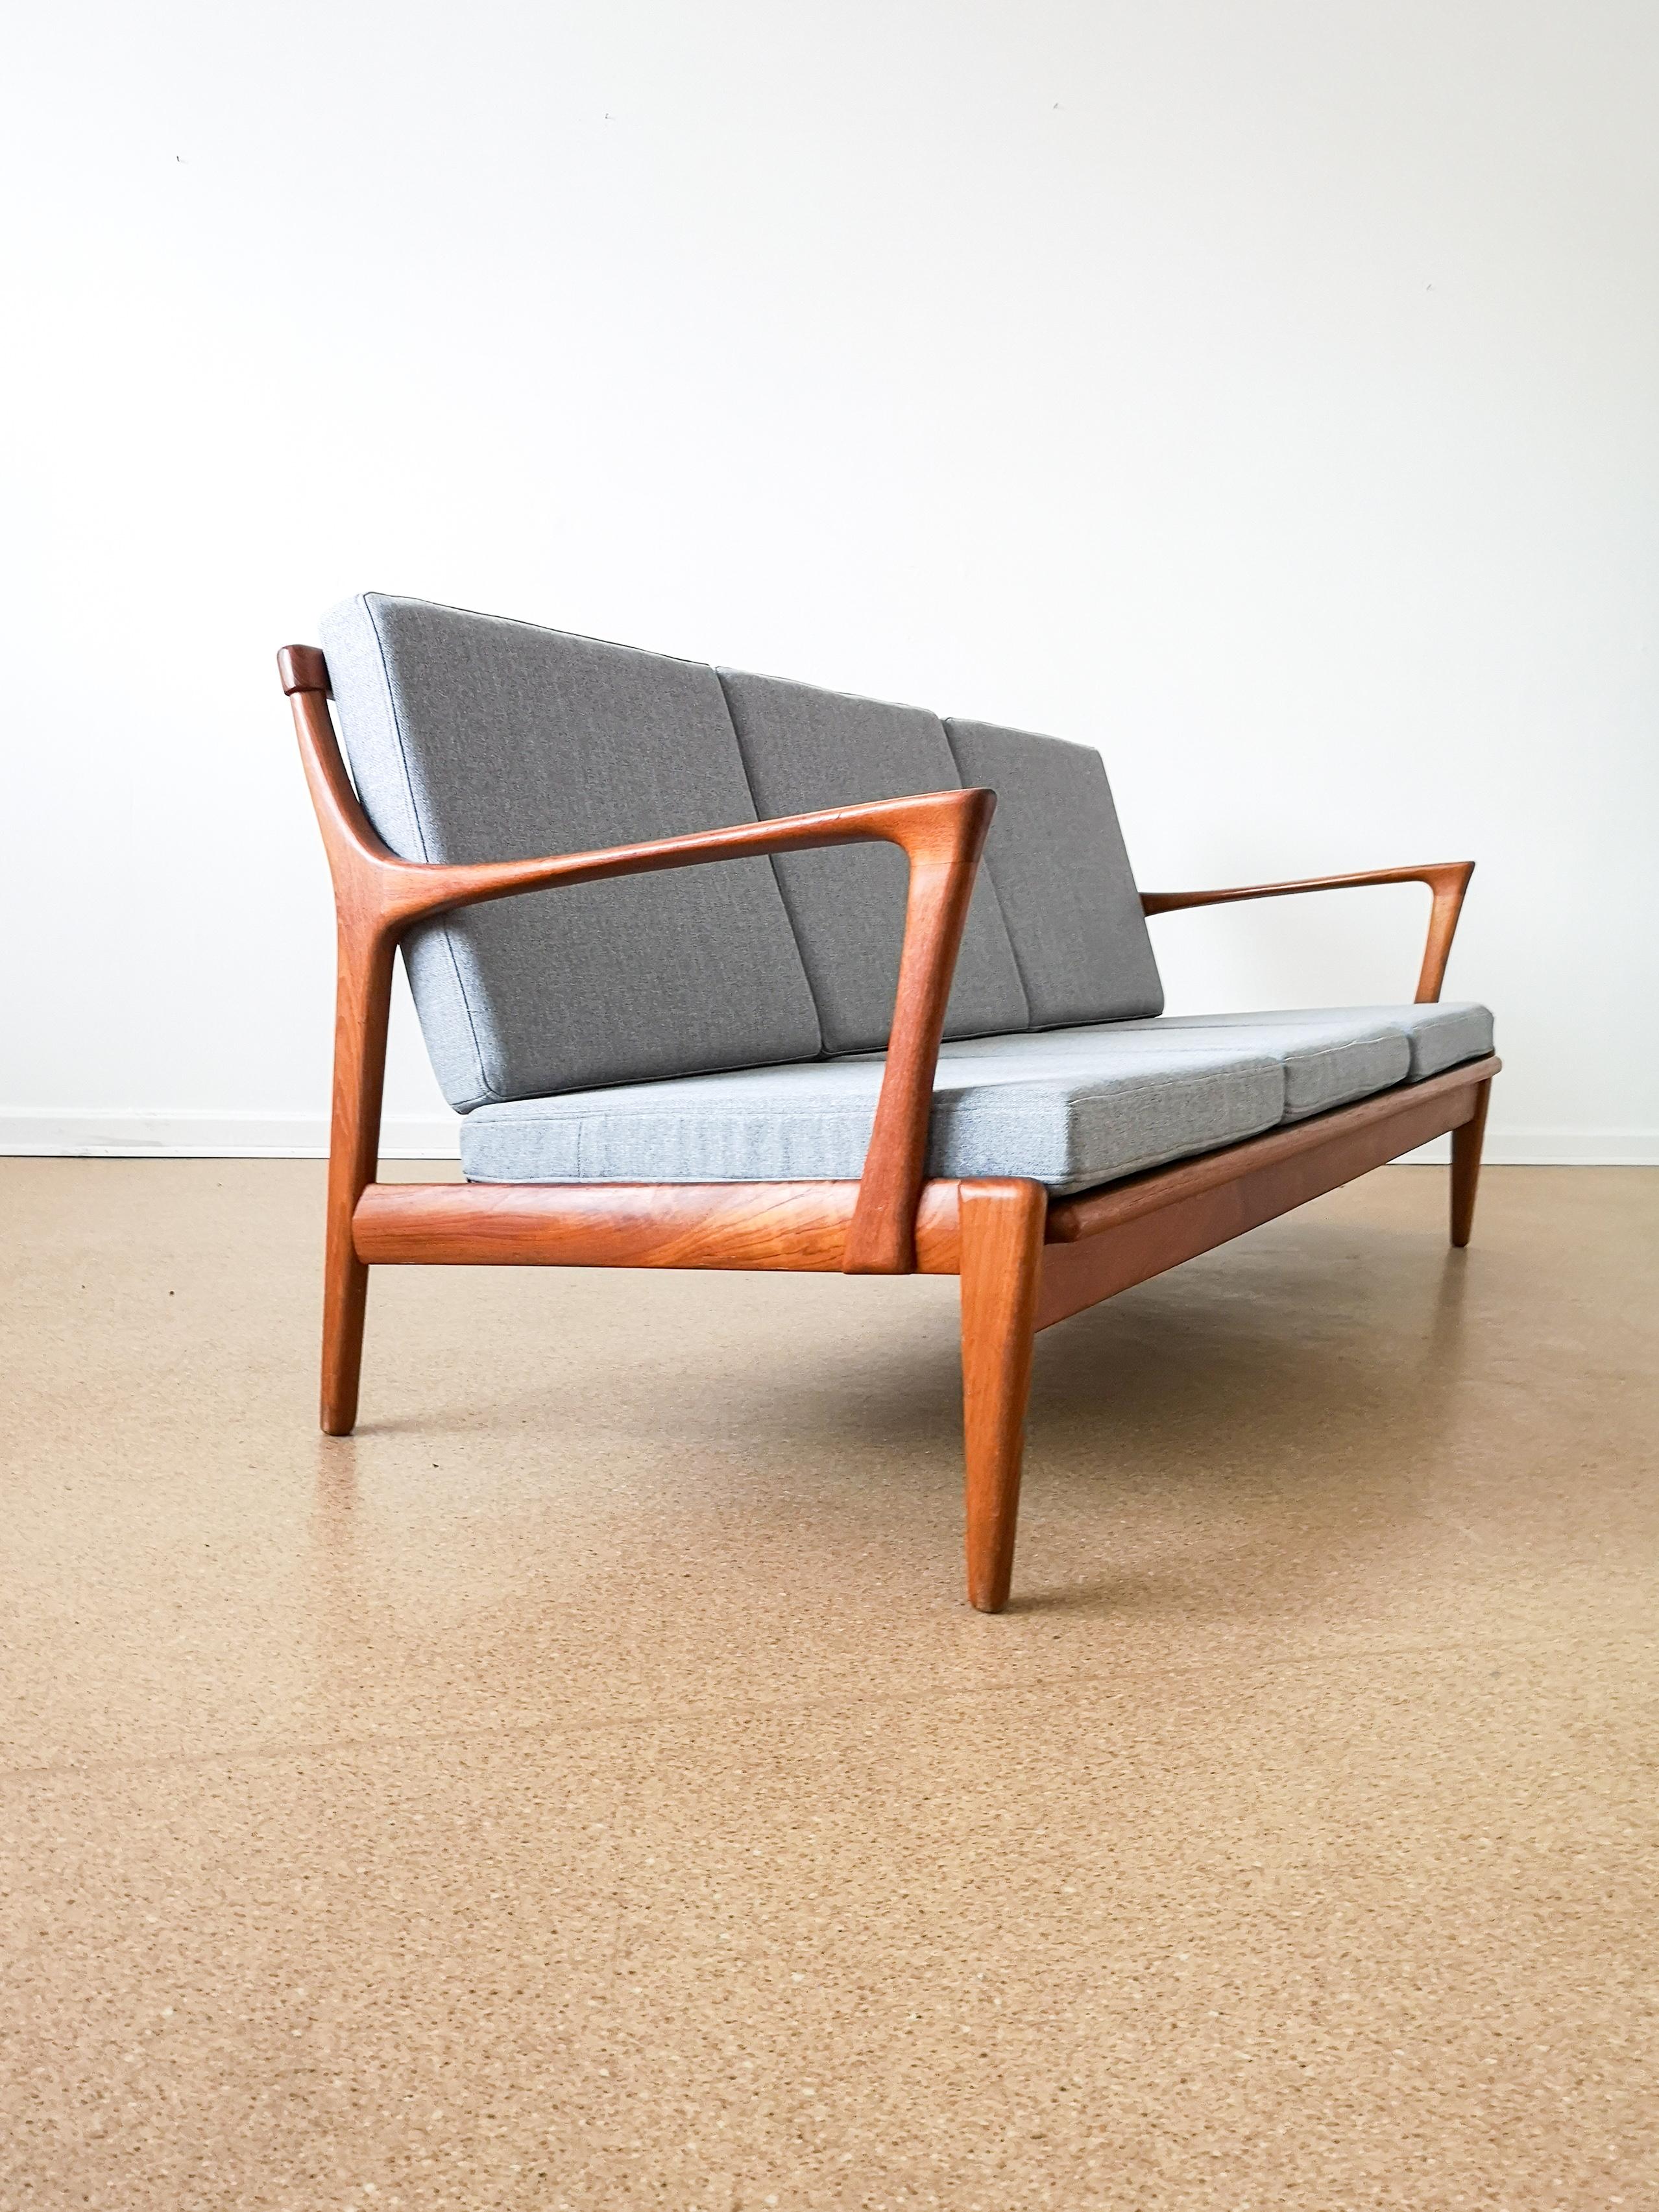 Sofa model Kuba designed by Bertil Fridhagen. Produced by Bröderna Andersson in Sweden. The way the teak is curved gives this sofa an exclusive vintage look. The sofa has been reupholstered and gives nearly a new excellent condition.
New fabric